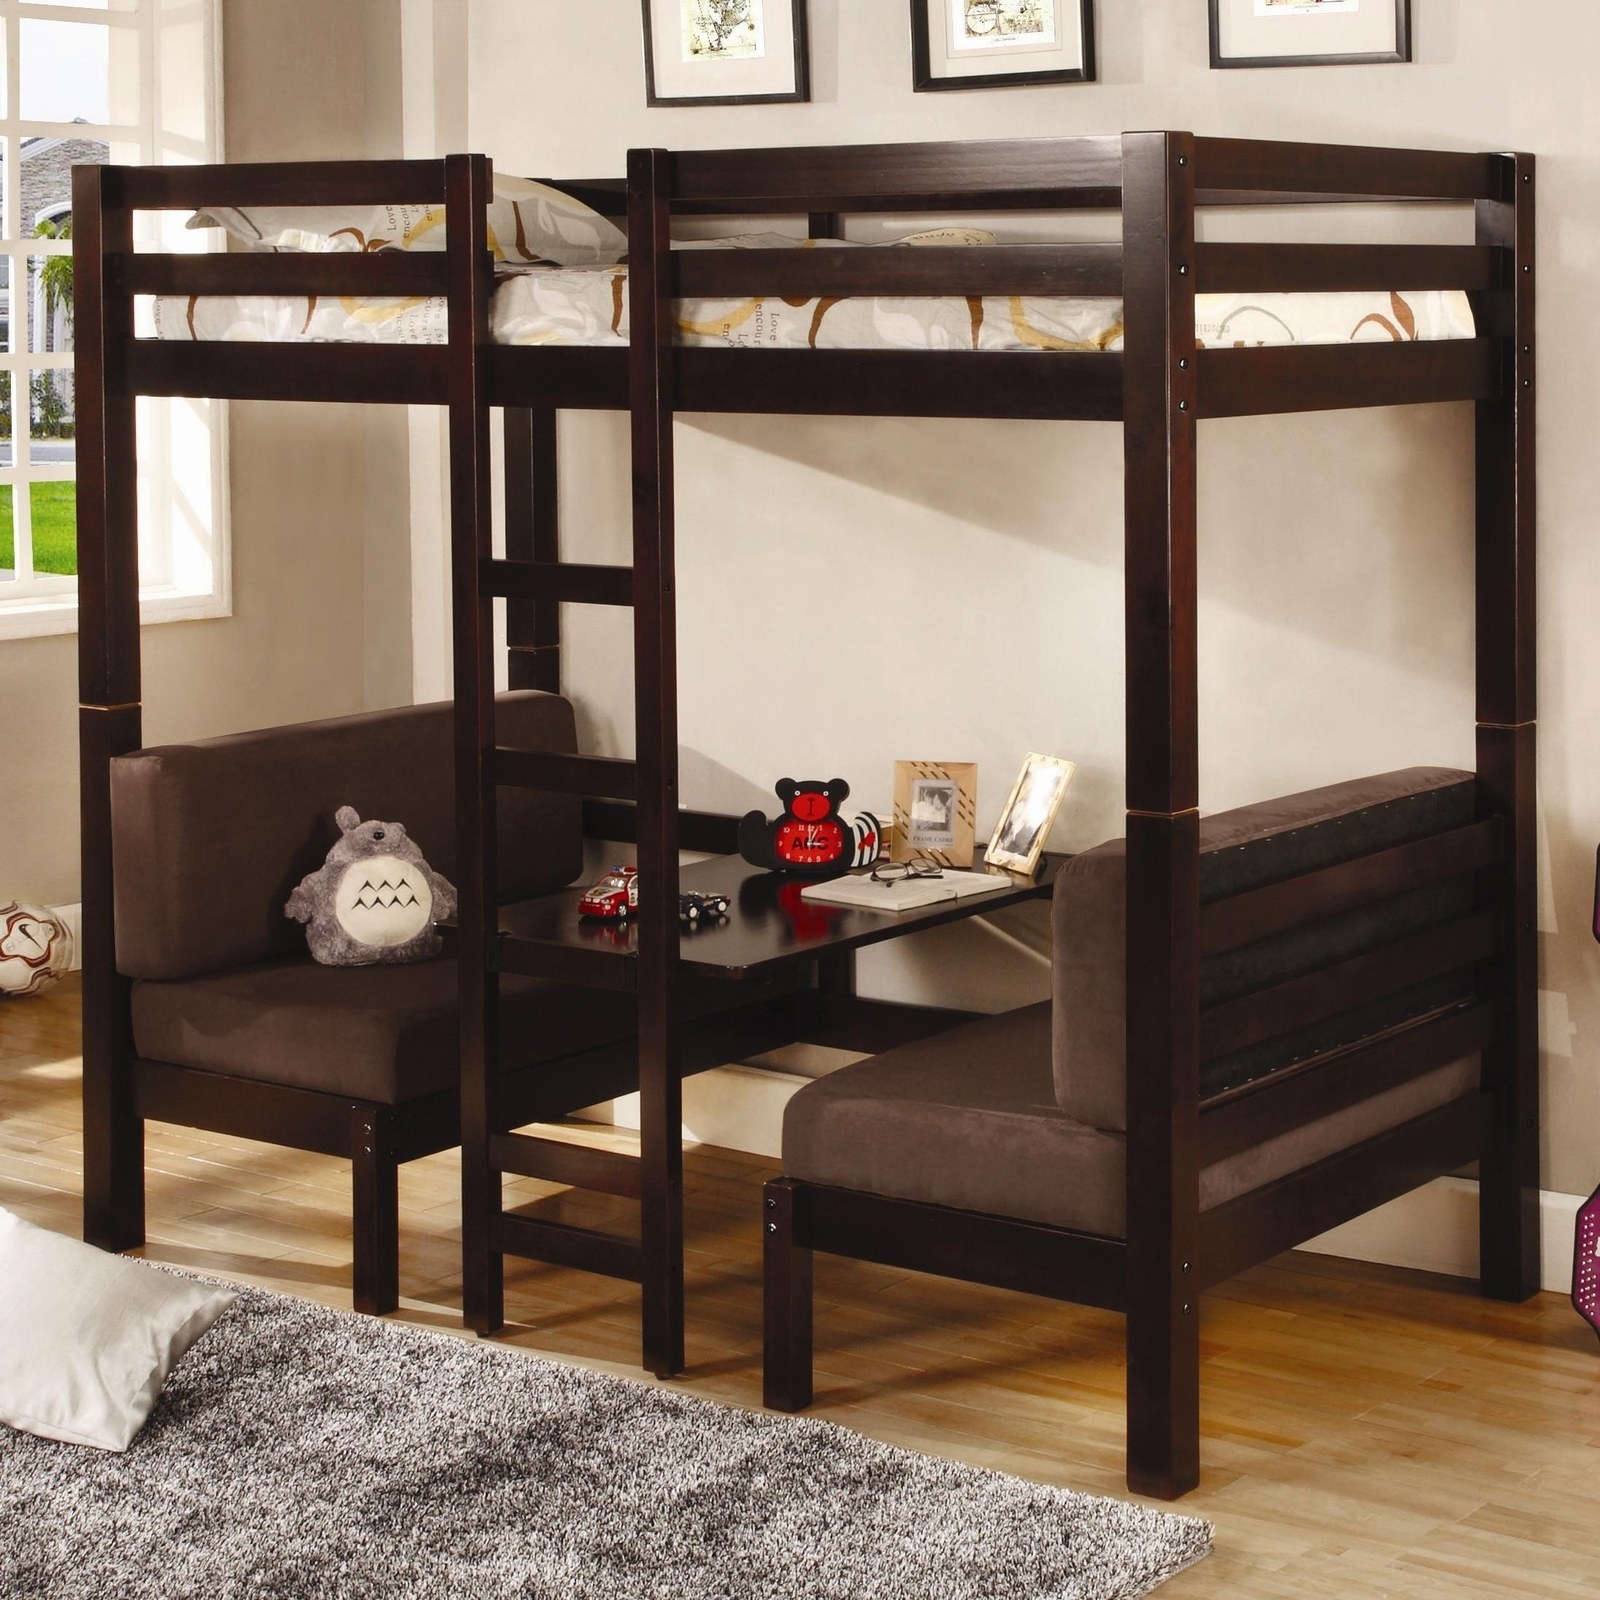 17 Loft Beds That Ll Save You So Much Space, Bunk Bed With Table Underneath